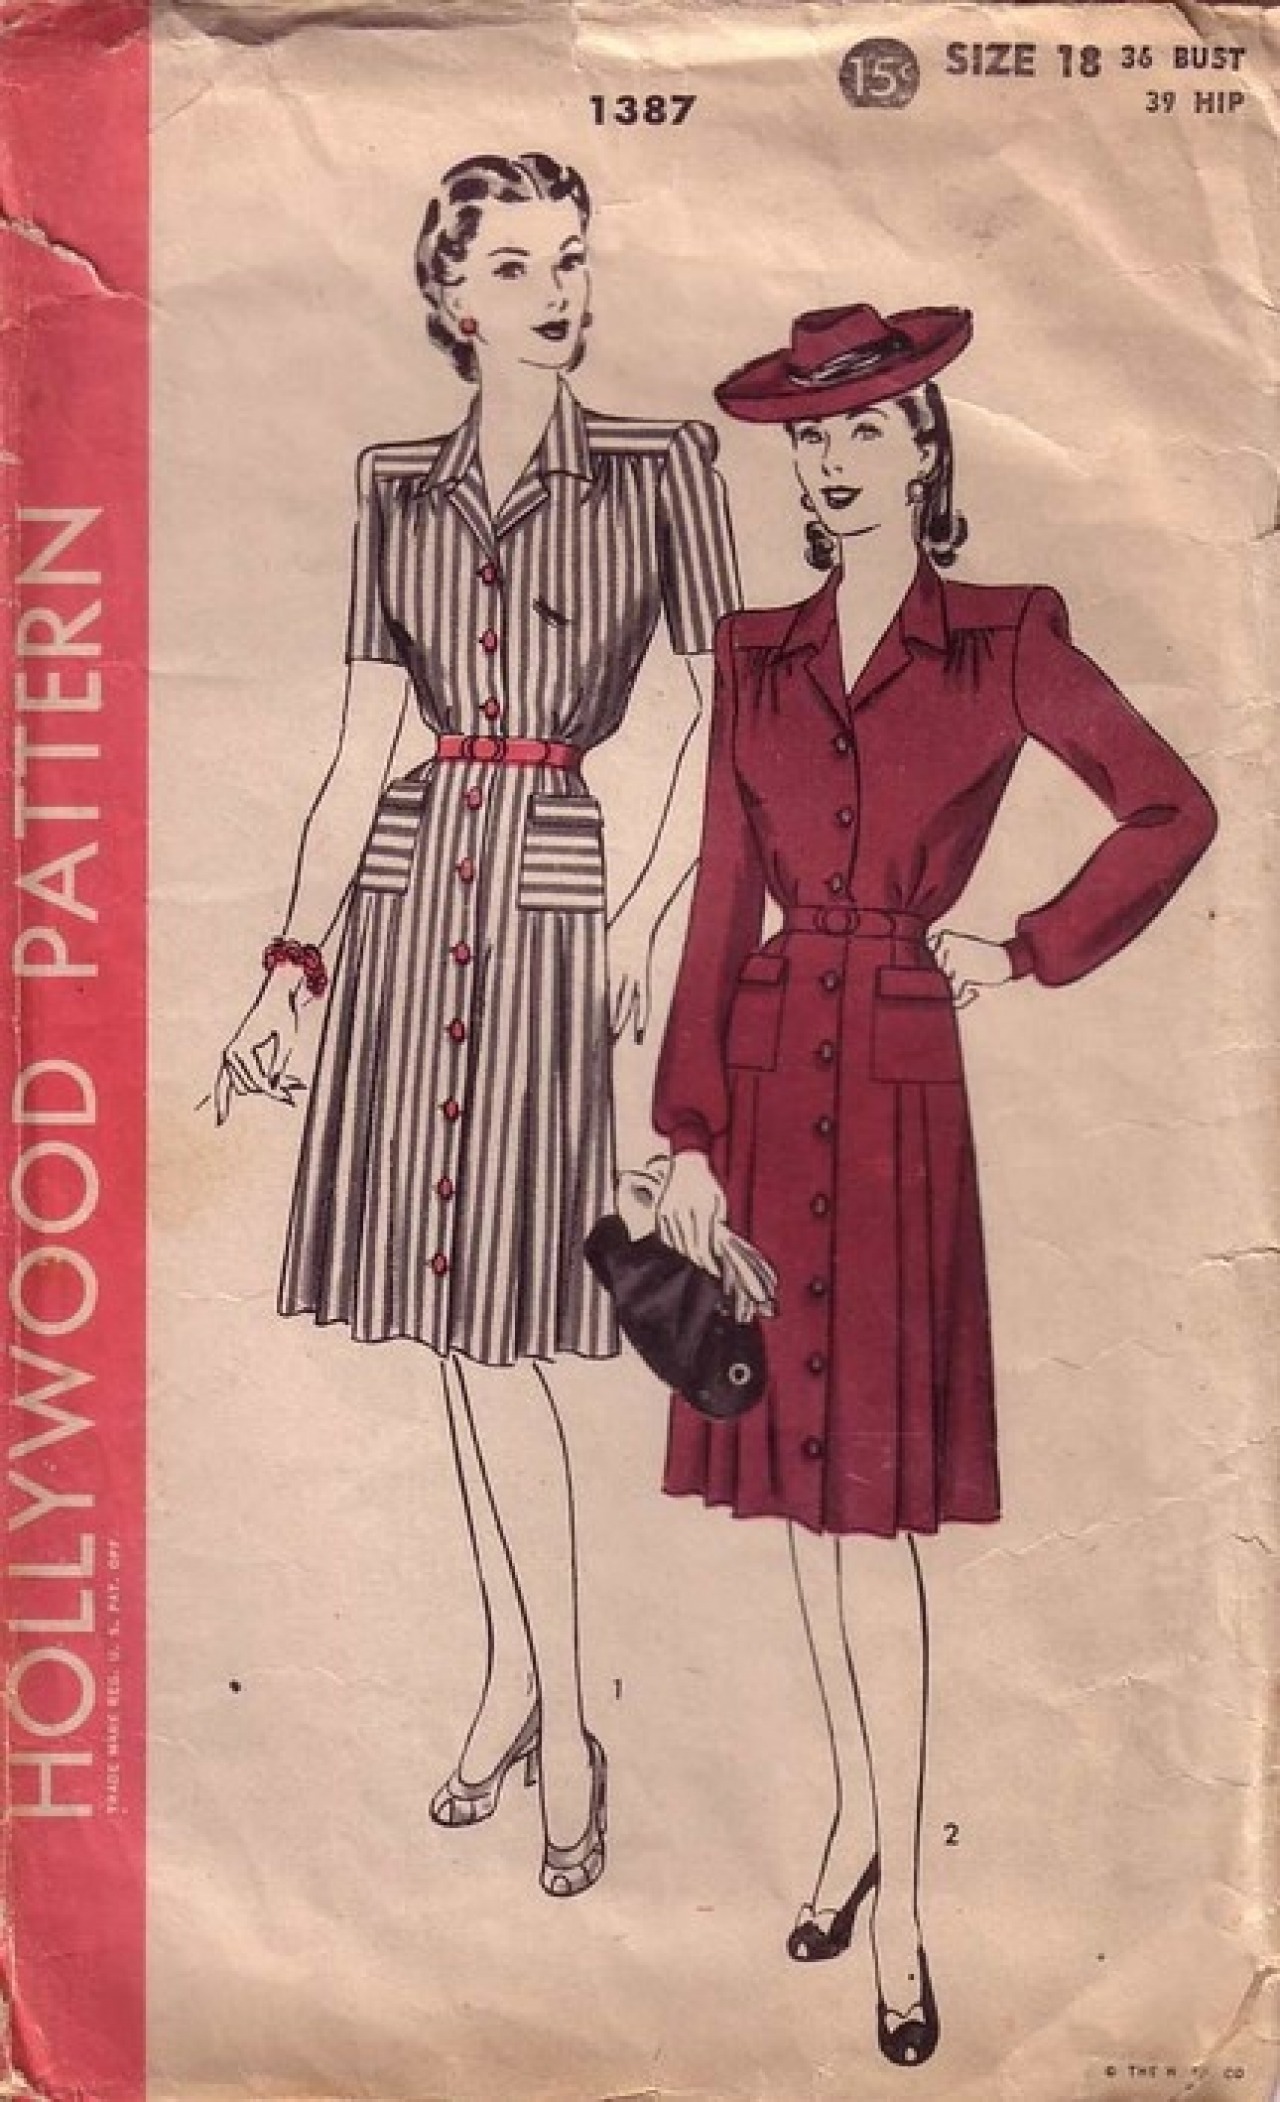 Silhouettes: 1930s-1940s women  Fashion and Decor: A Cultural History